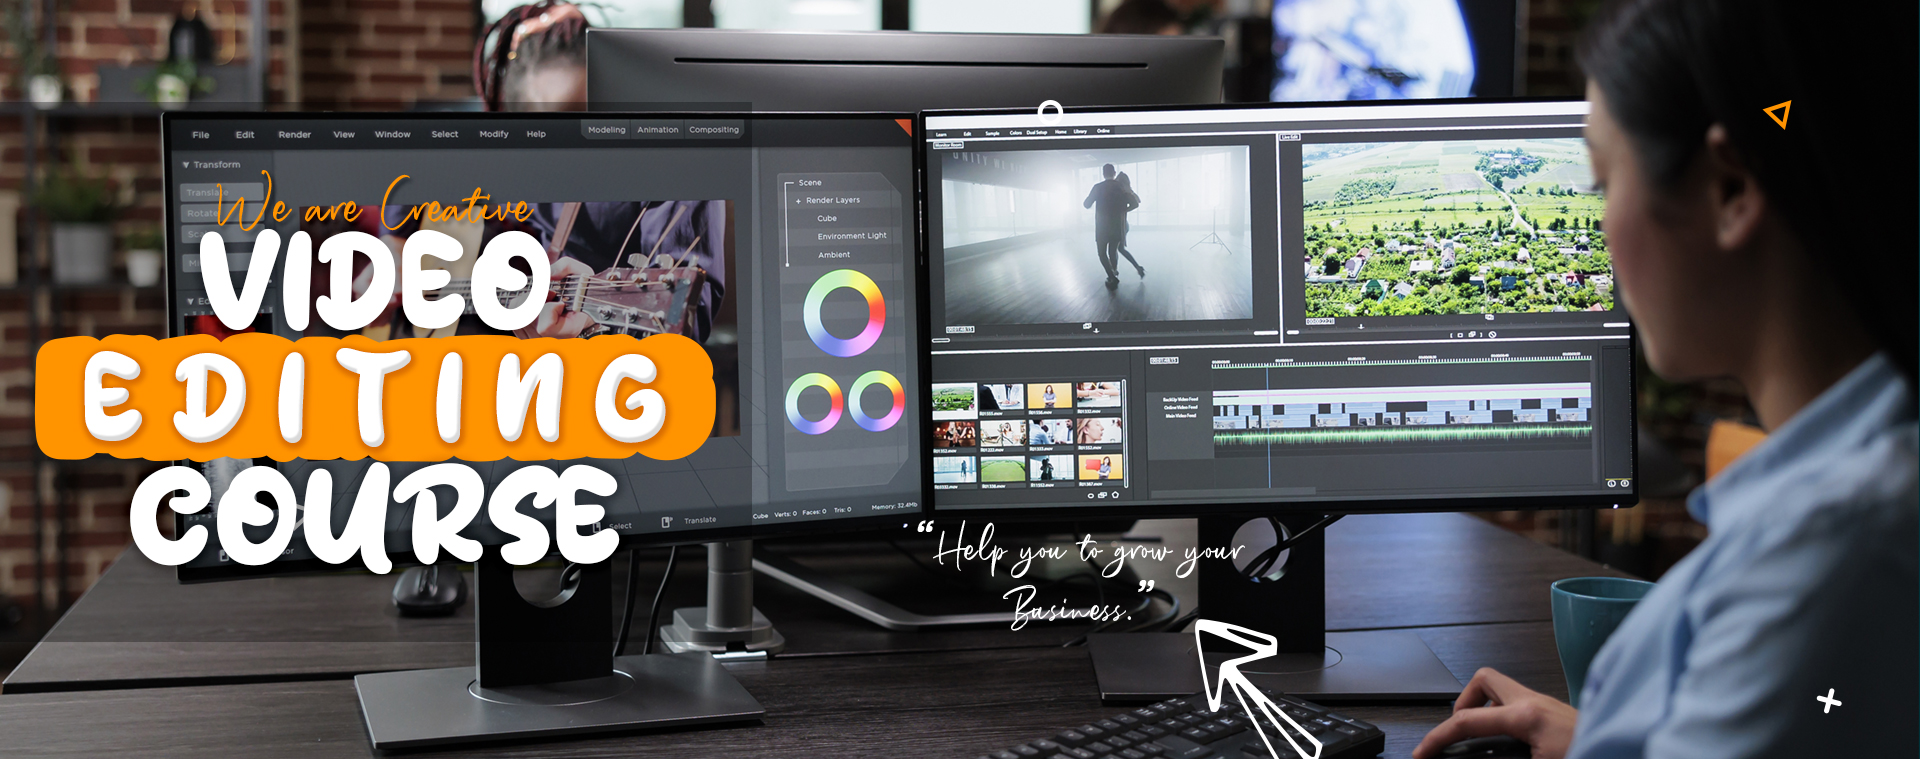 Enroll in our video editing course in Surat and get 100% job placement assistance and lifetime support.